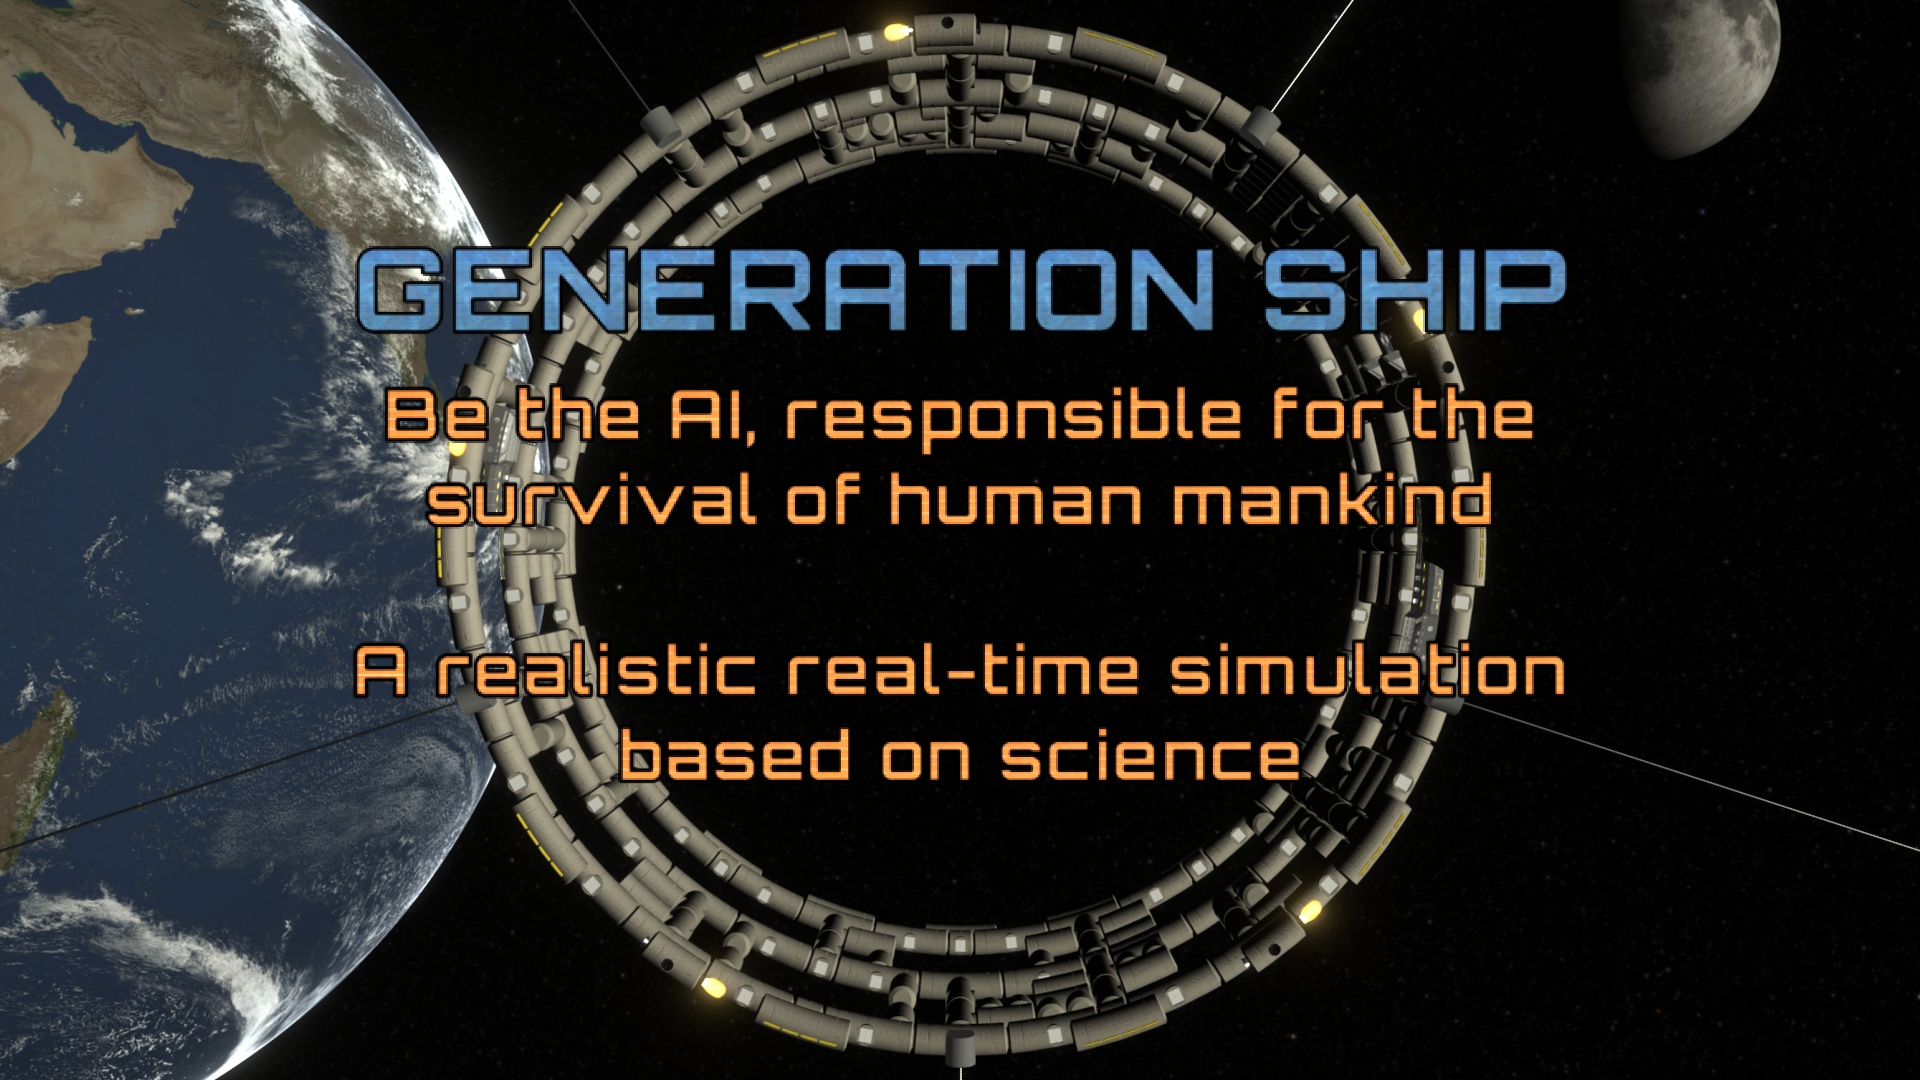 2022-11-01_generationship_-_rnews_picture.jpg